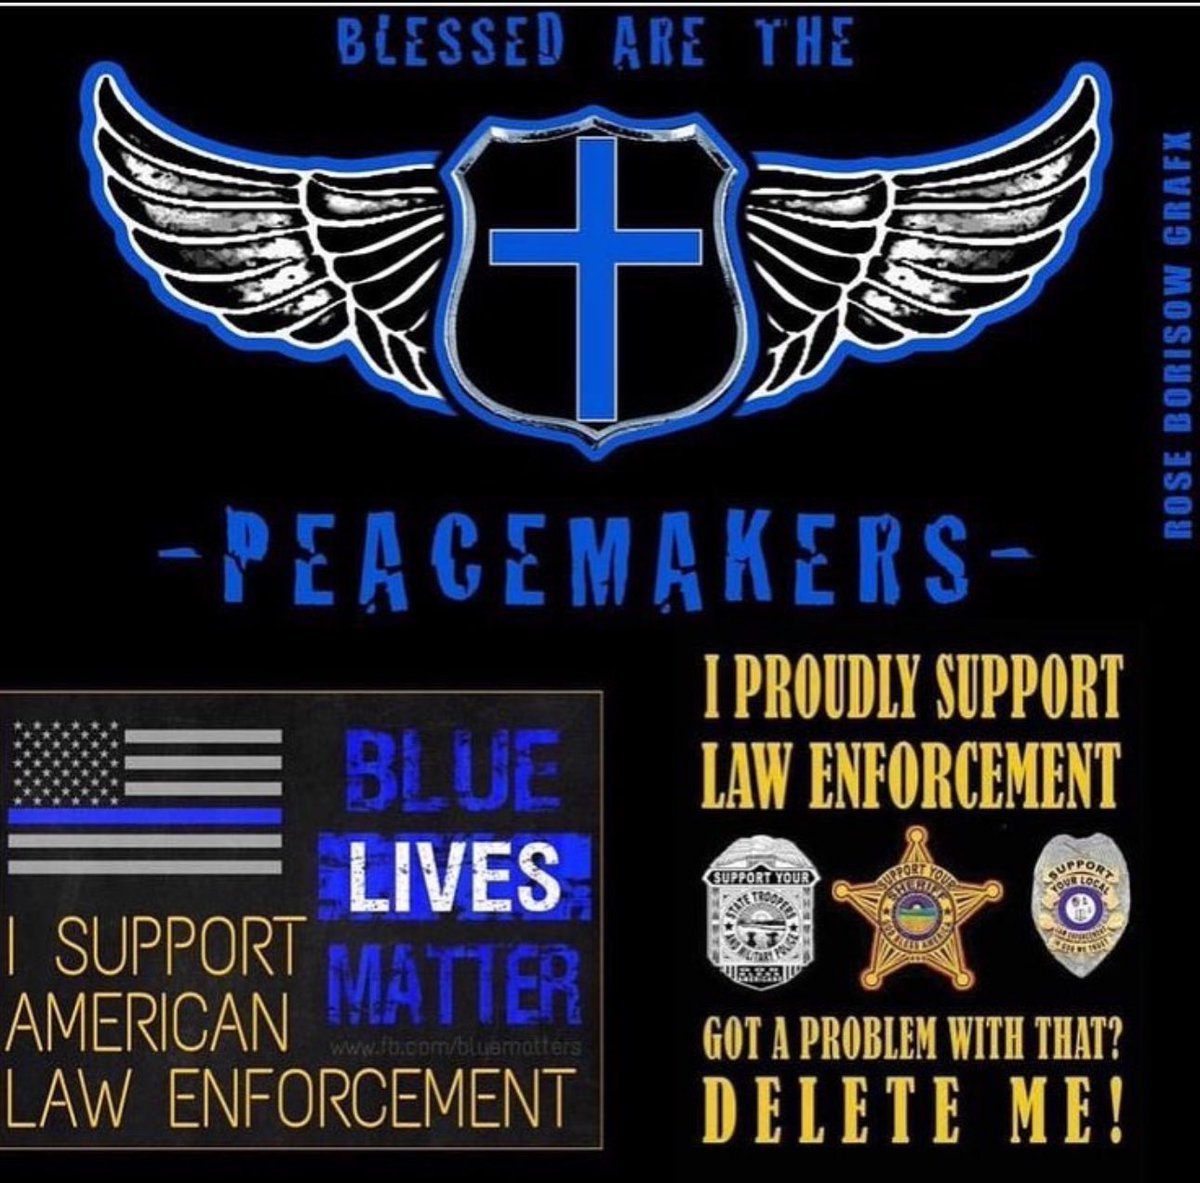 💙🖤 Thank you, to all our Police Officers, who put their lives on the line, both on and off duty. 
I’m so grateful for all of you! 💙🖤❤️🇺🇸
#ThankYouThursday 
#ThinBlueLine #BackTheBadge #BackTheBlue